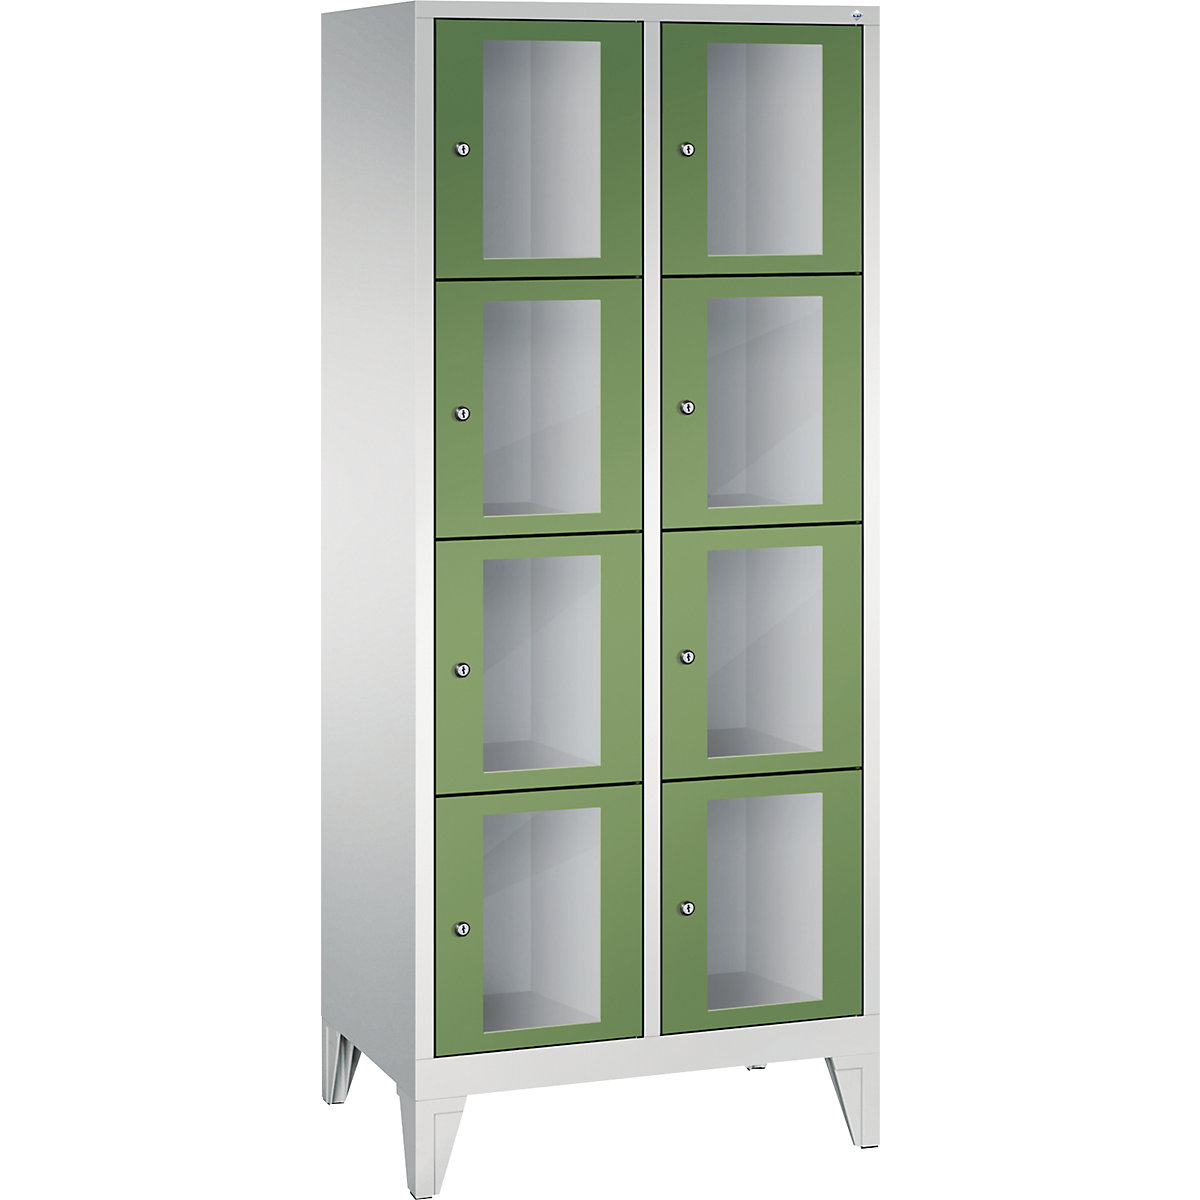 CLASSIC locker unit, compartment height 375 mm, with feet – C+P, 8 compartments, width 810 mm, reseda green door-5